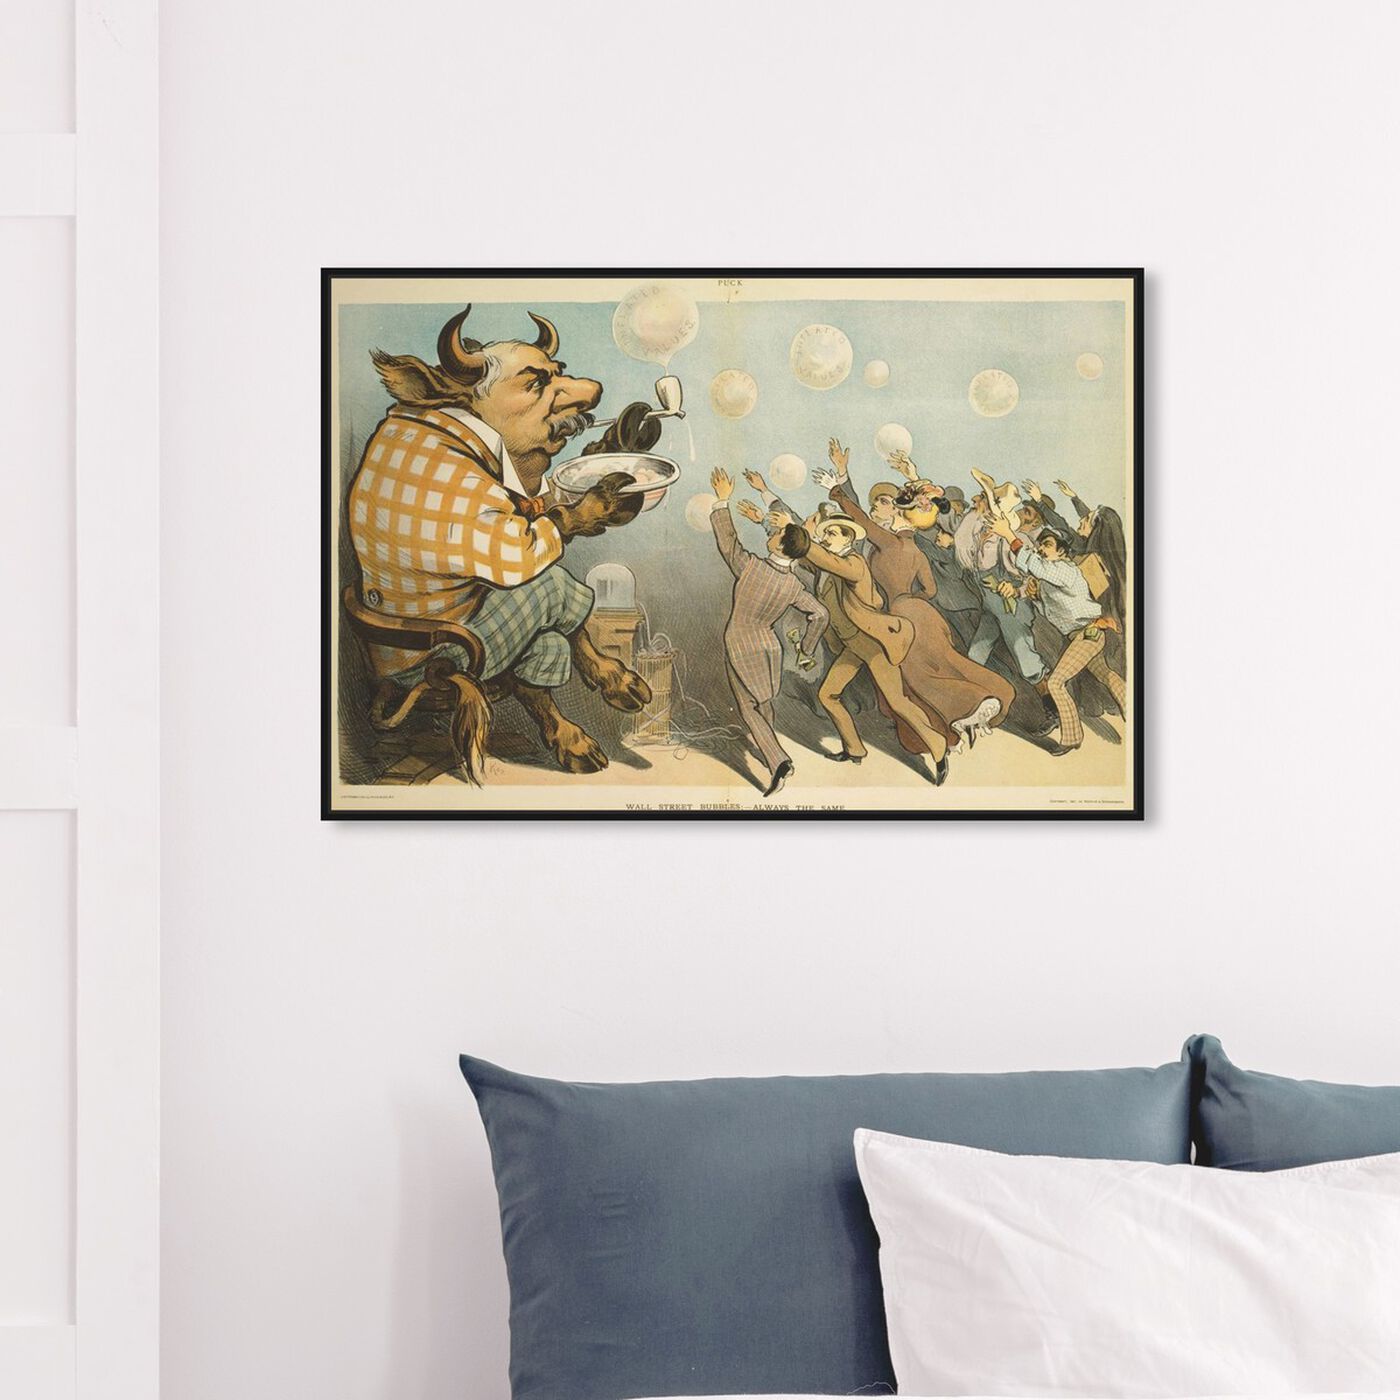 Hanging view of Wall Street Bubbles featuring classic and figurative and modern classic art.